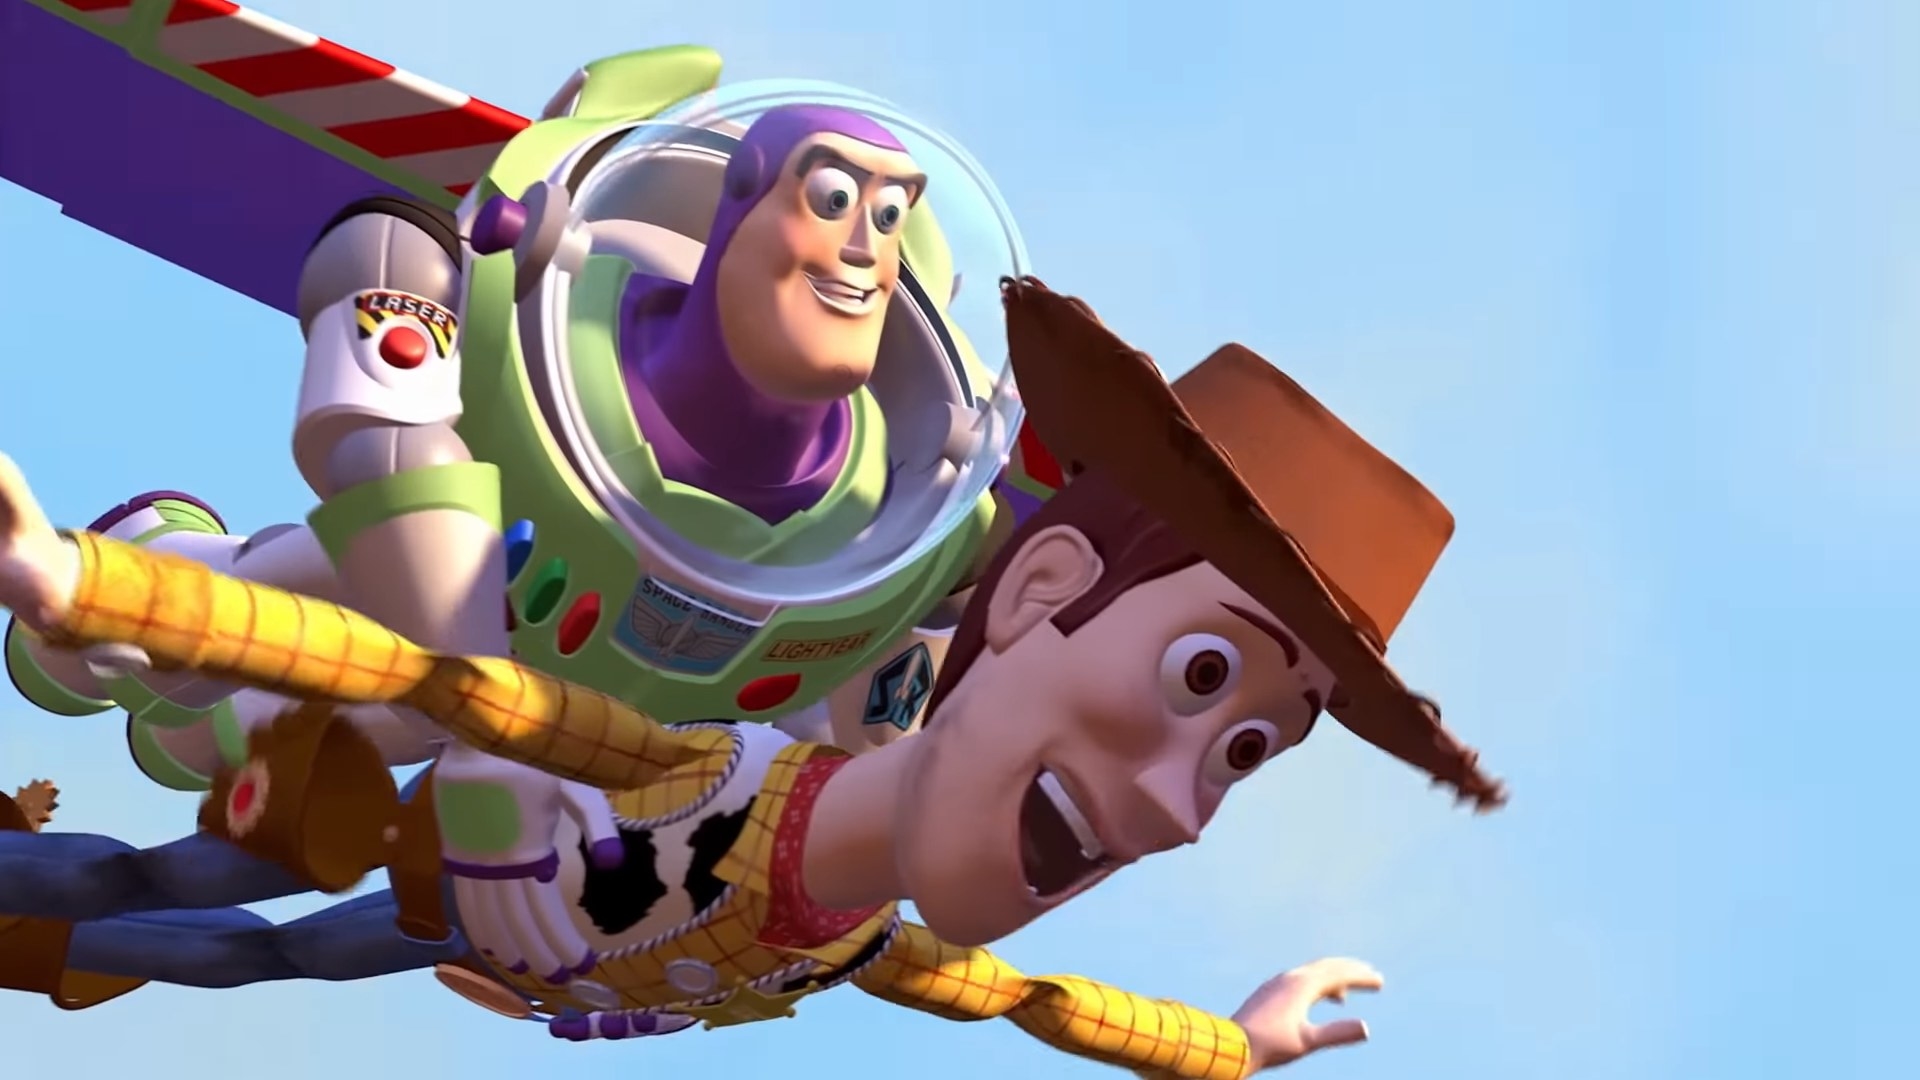 Buzz and Woody flying together in &quot;Toy Story&quot;